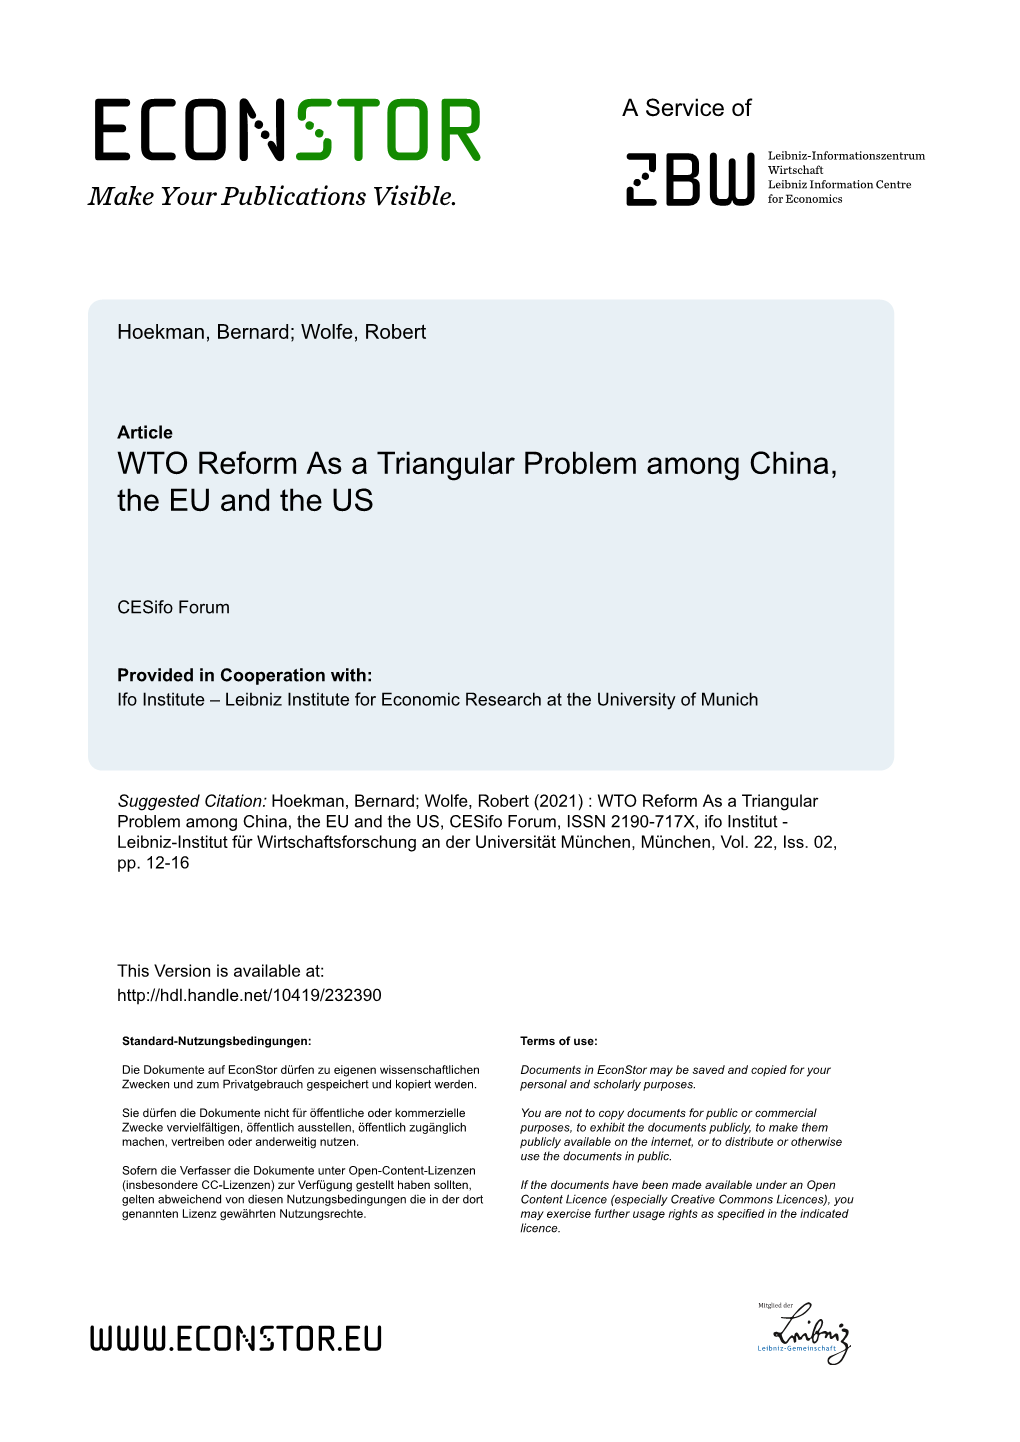 WTO Reform As a Triangular Problem Among China, the EU and the US